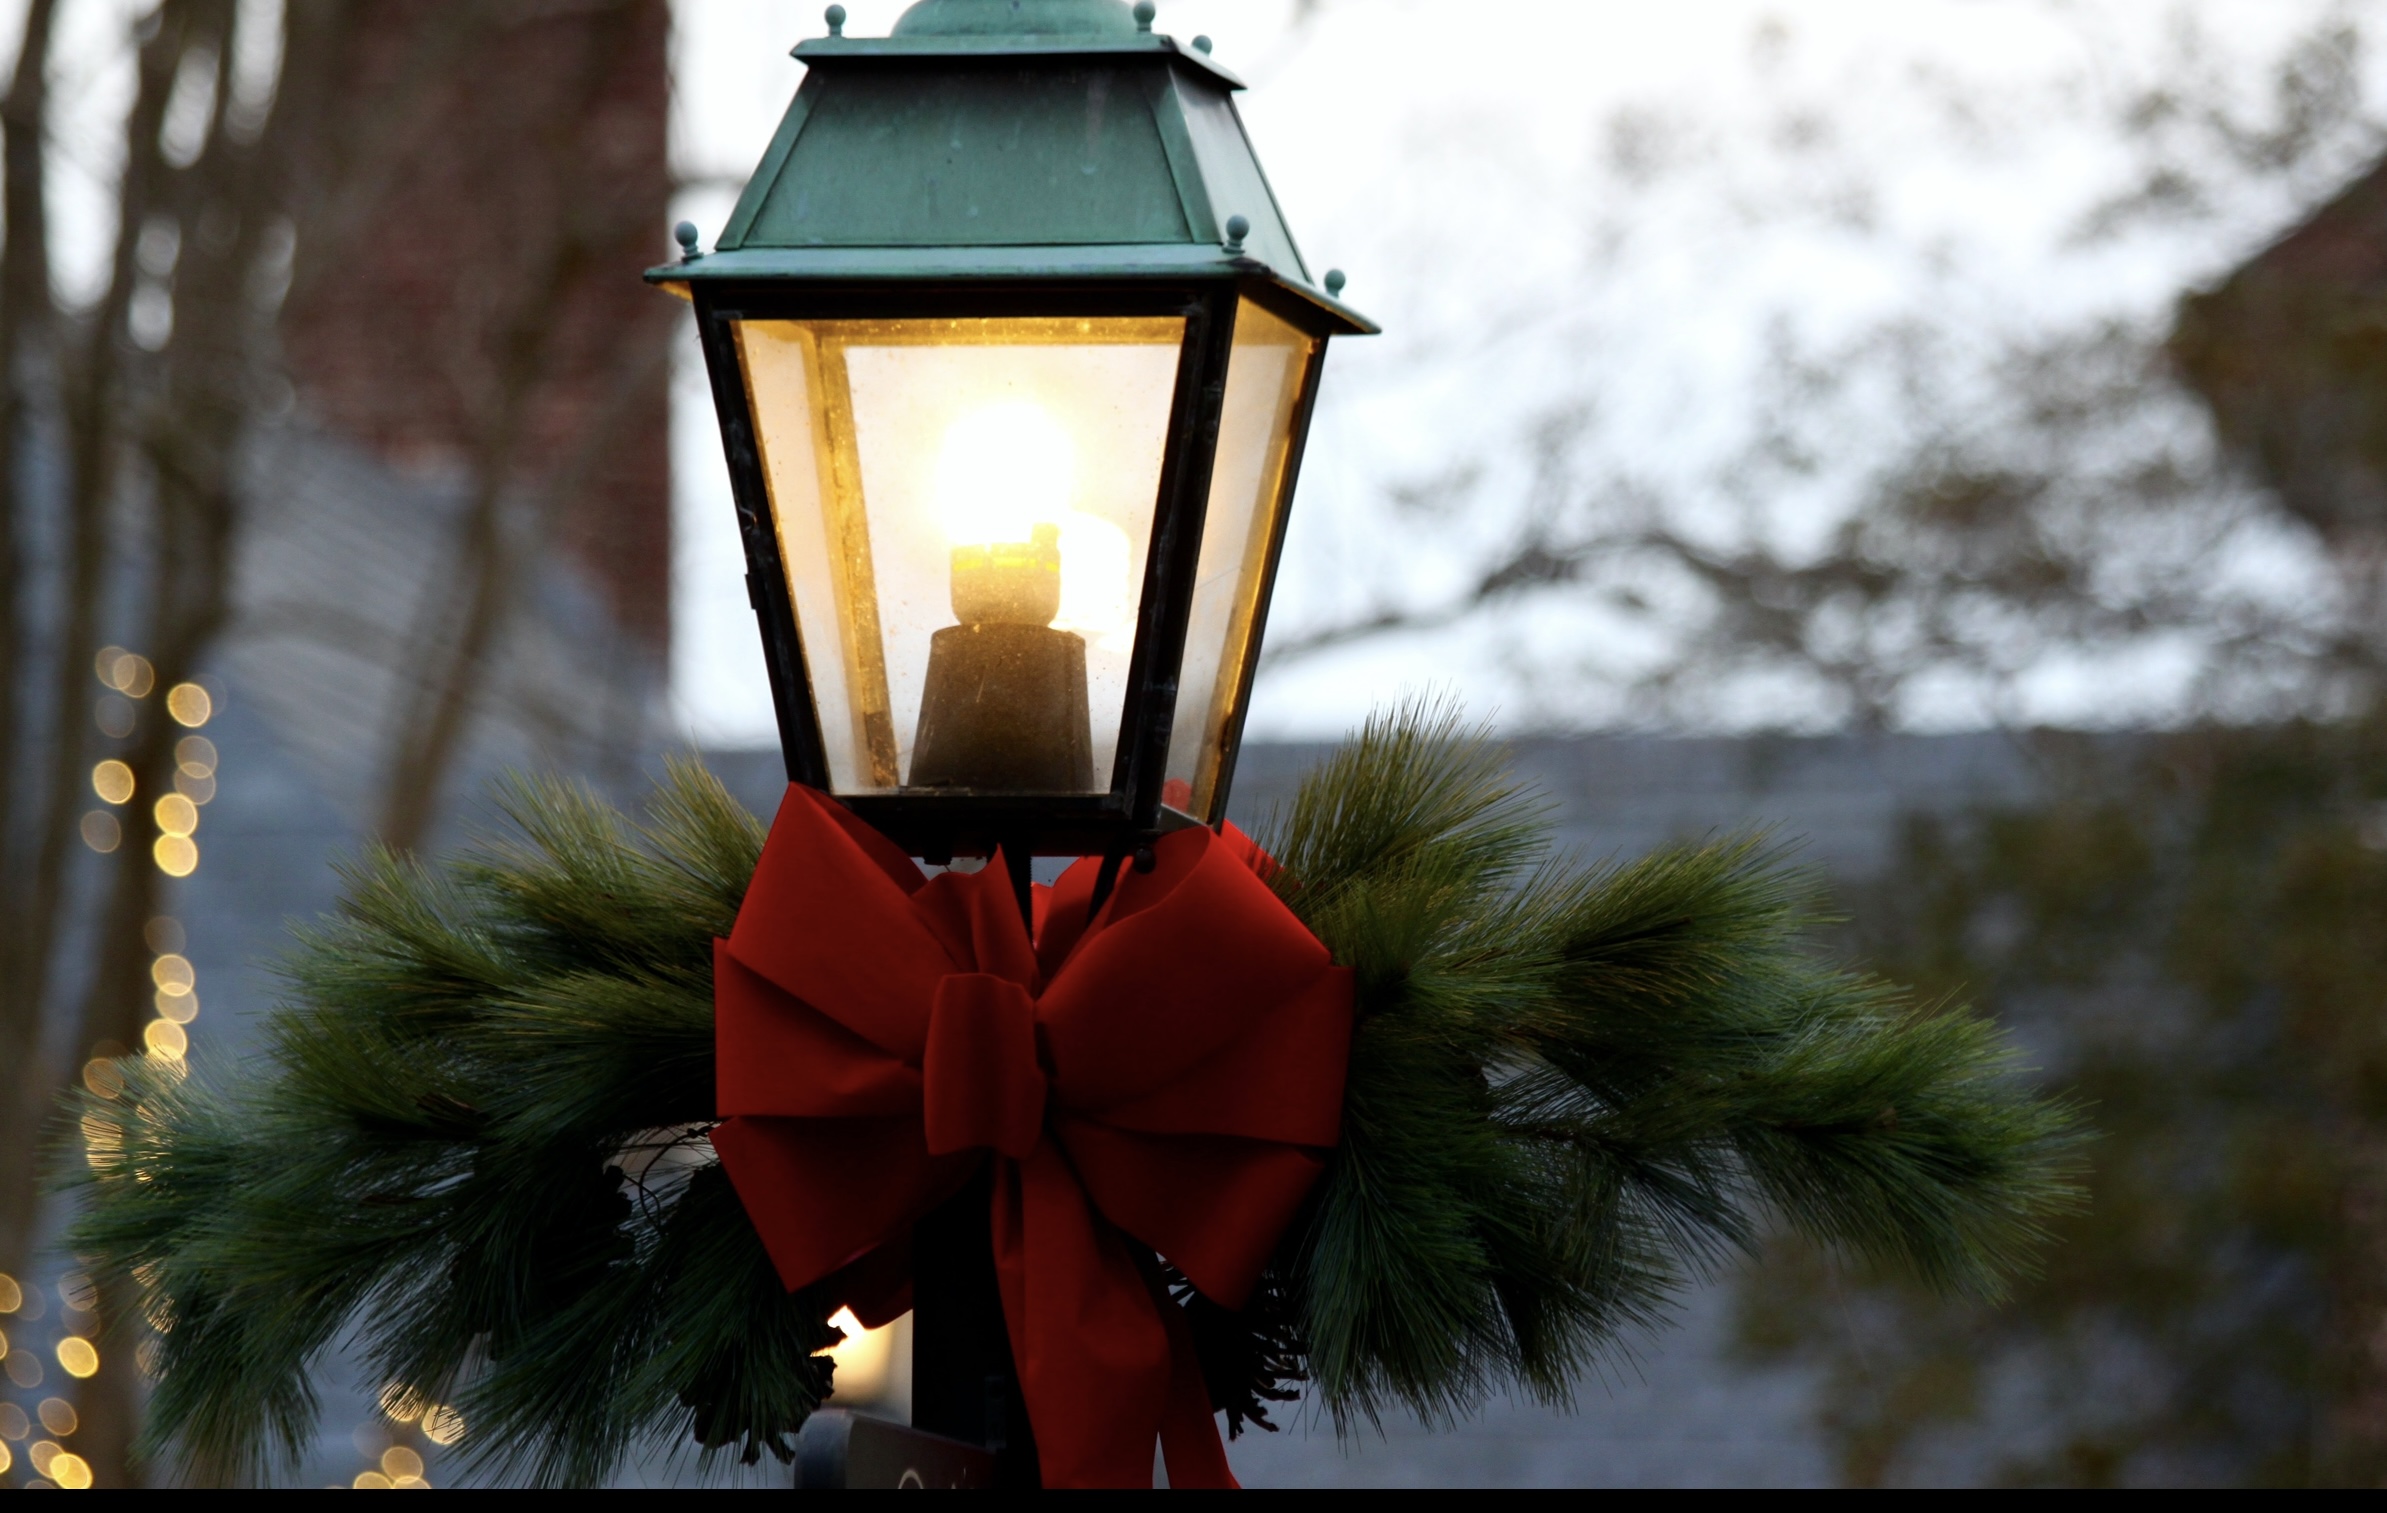 Grapevine, Texas is a northern city that is very accessible for travelers.
Pictured: a street light with a red bow and green pine tree decorations for Christmas 